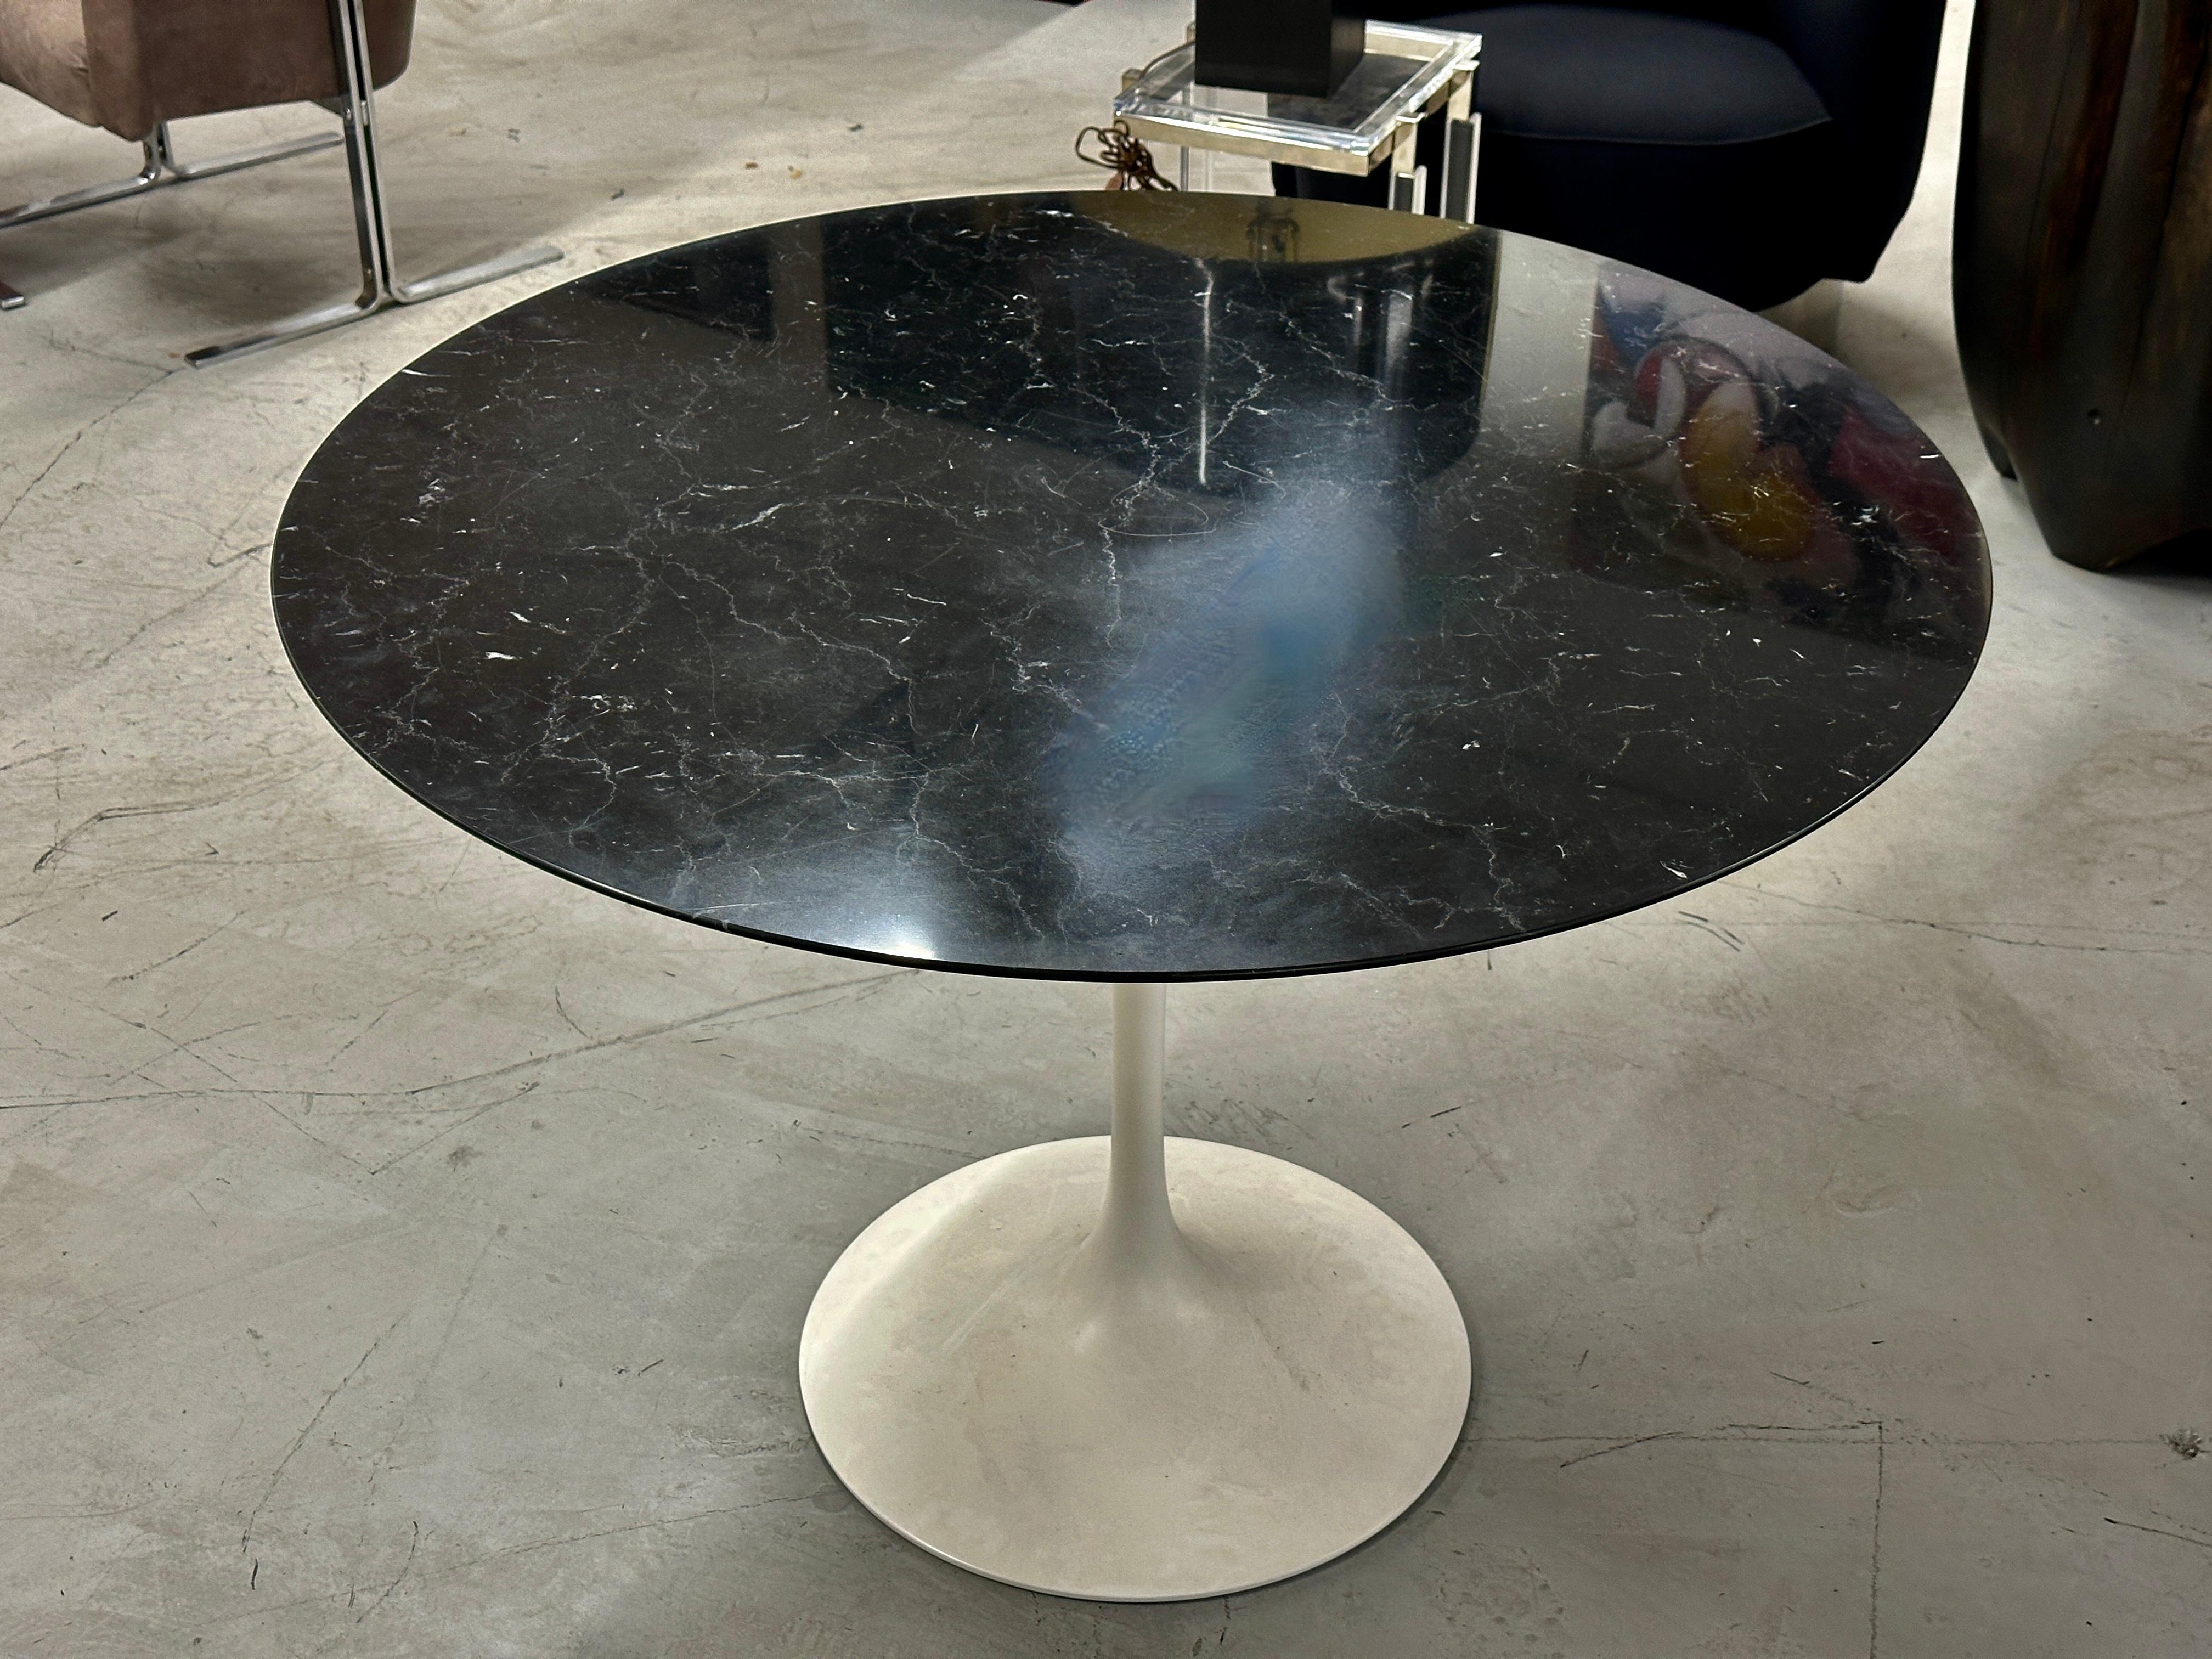 A lovely Knoll Tulip table designed by Eero Saarinen. It features a beautifully grained black marble top and white base. We acquired this table out of the estate of an antique dealer's home. It is 42 inches round and 28.5 inches tall. The top has